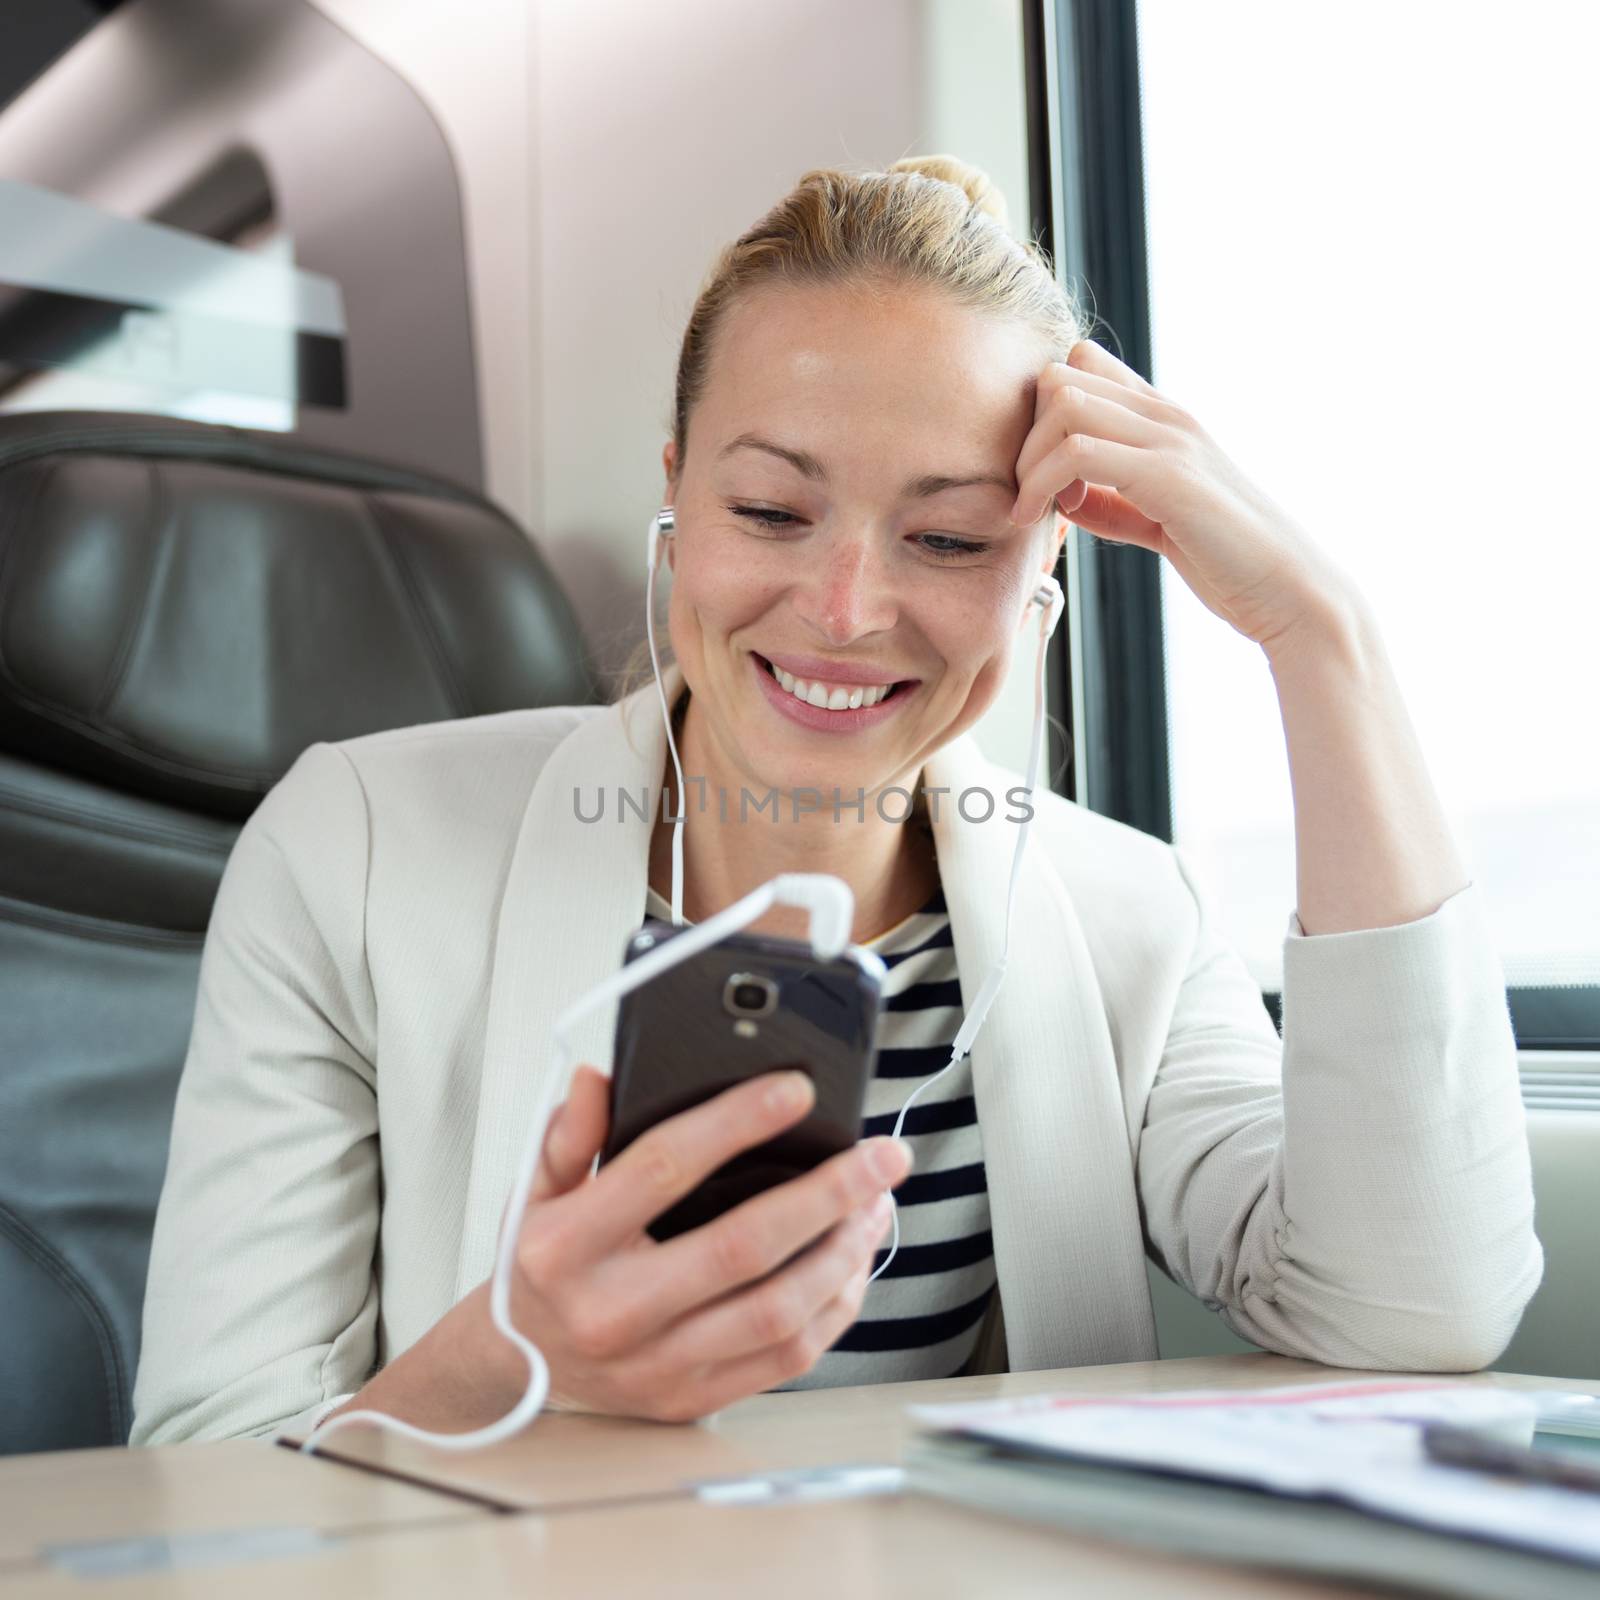 Businesswoman communicating on cellphone using headphone set while traveling by train in business class seat.